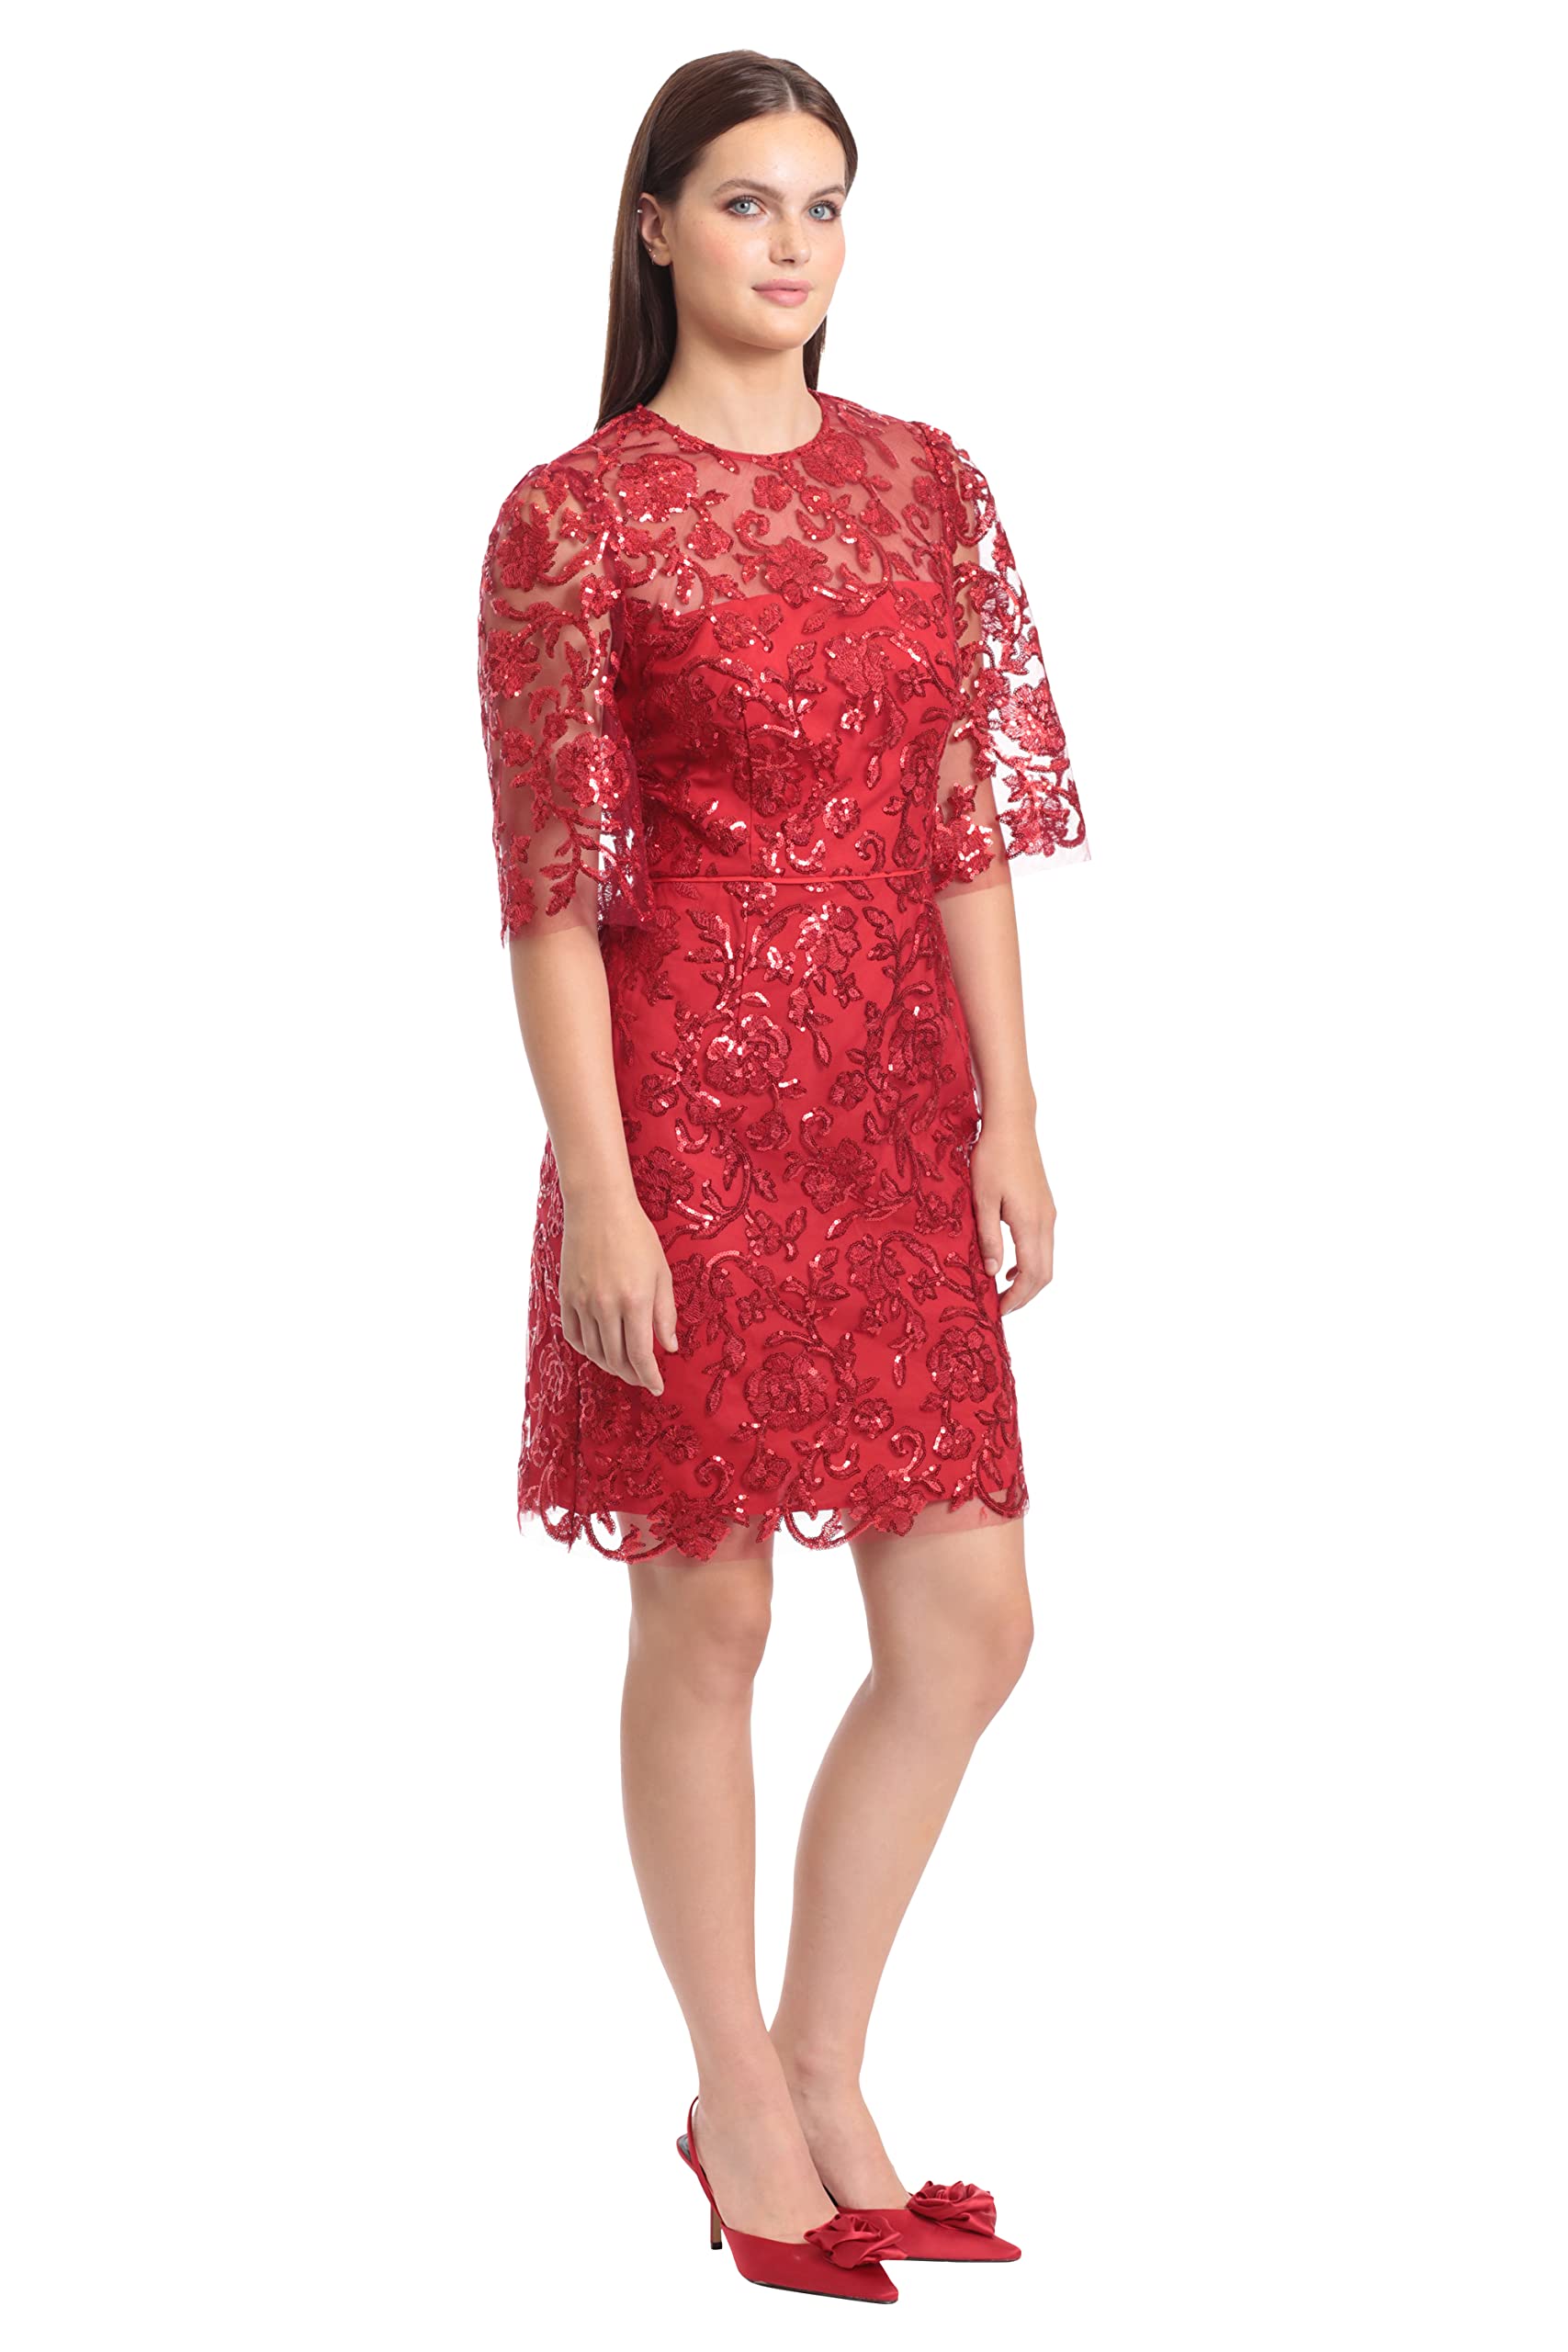 Maggy London Women's Holiday Embroidered Dress Embroidery Occasion Event Party Guest of